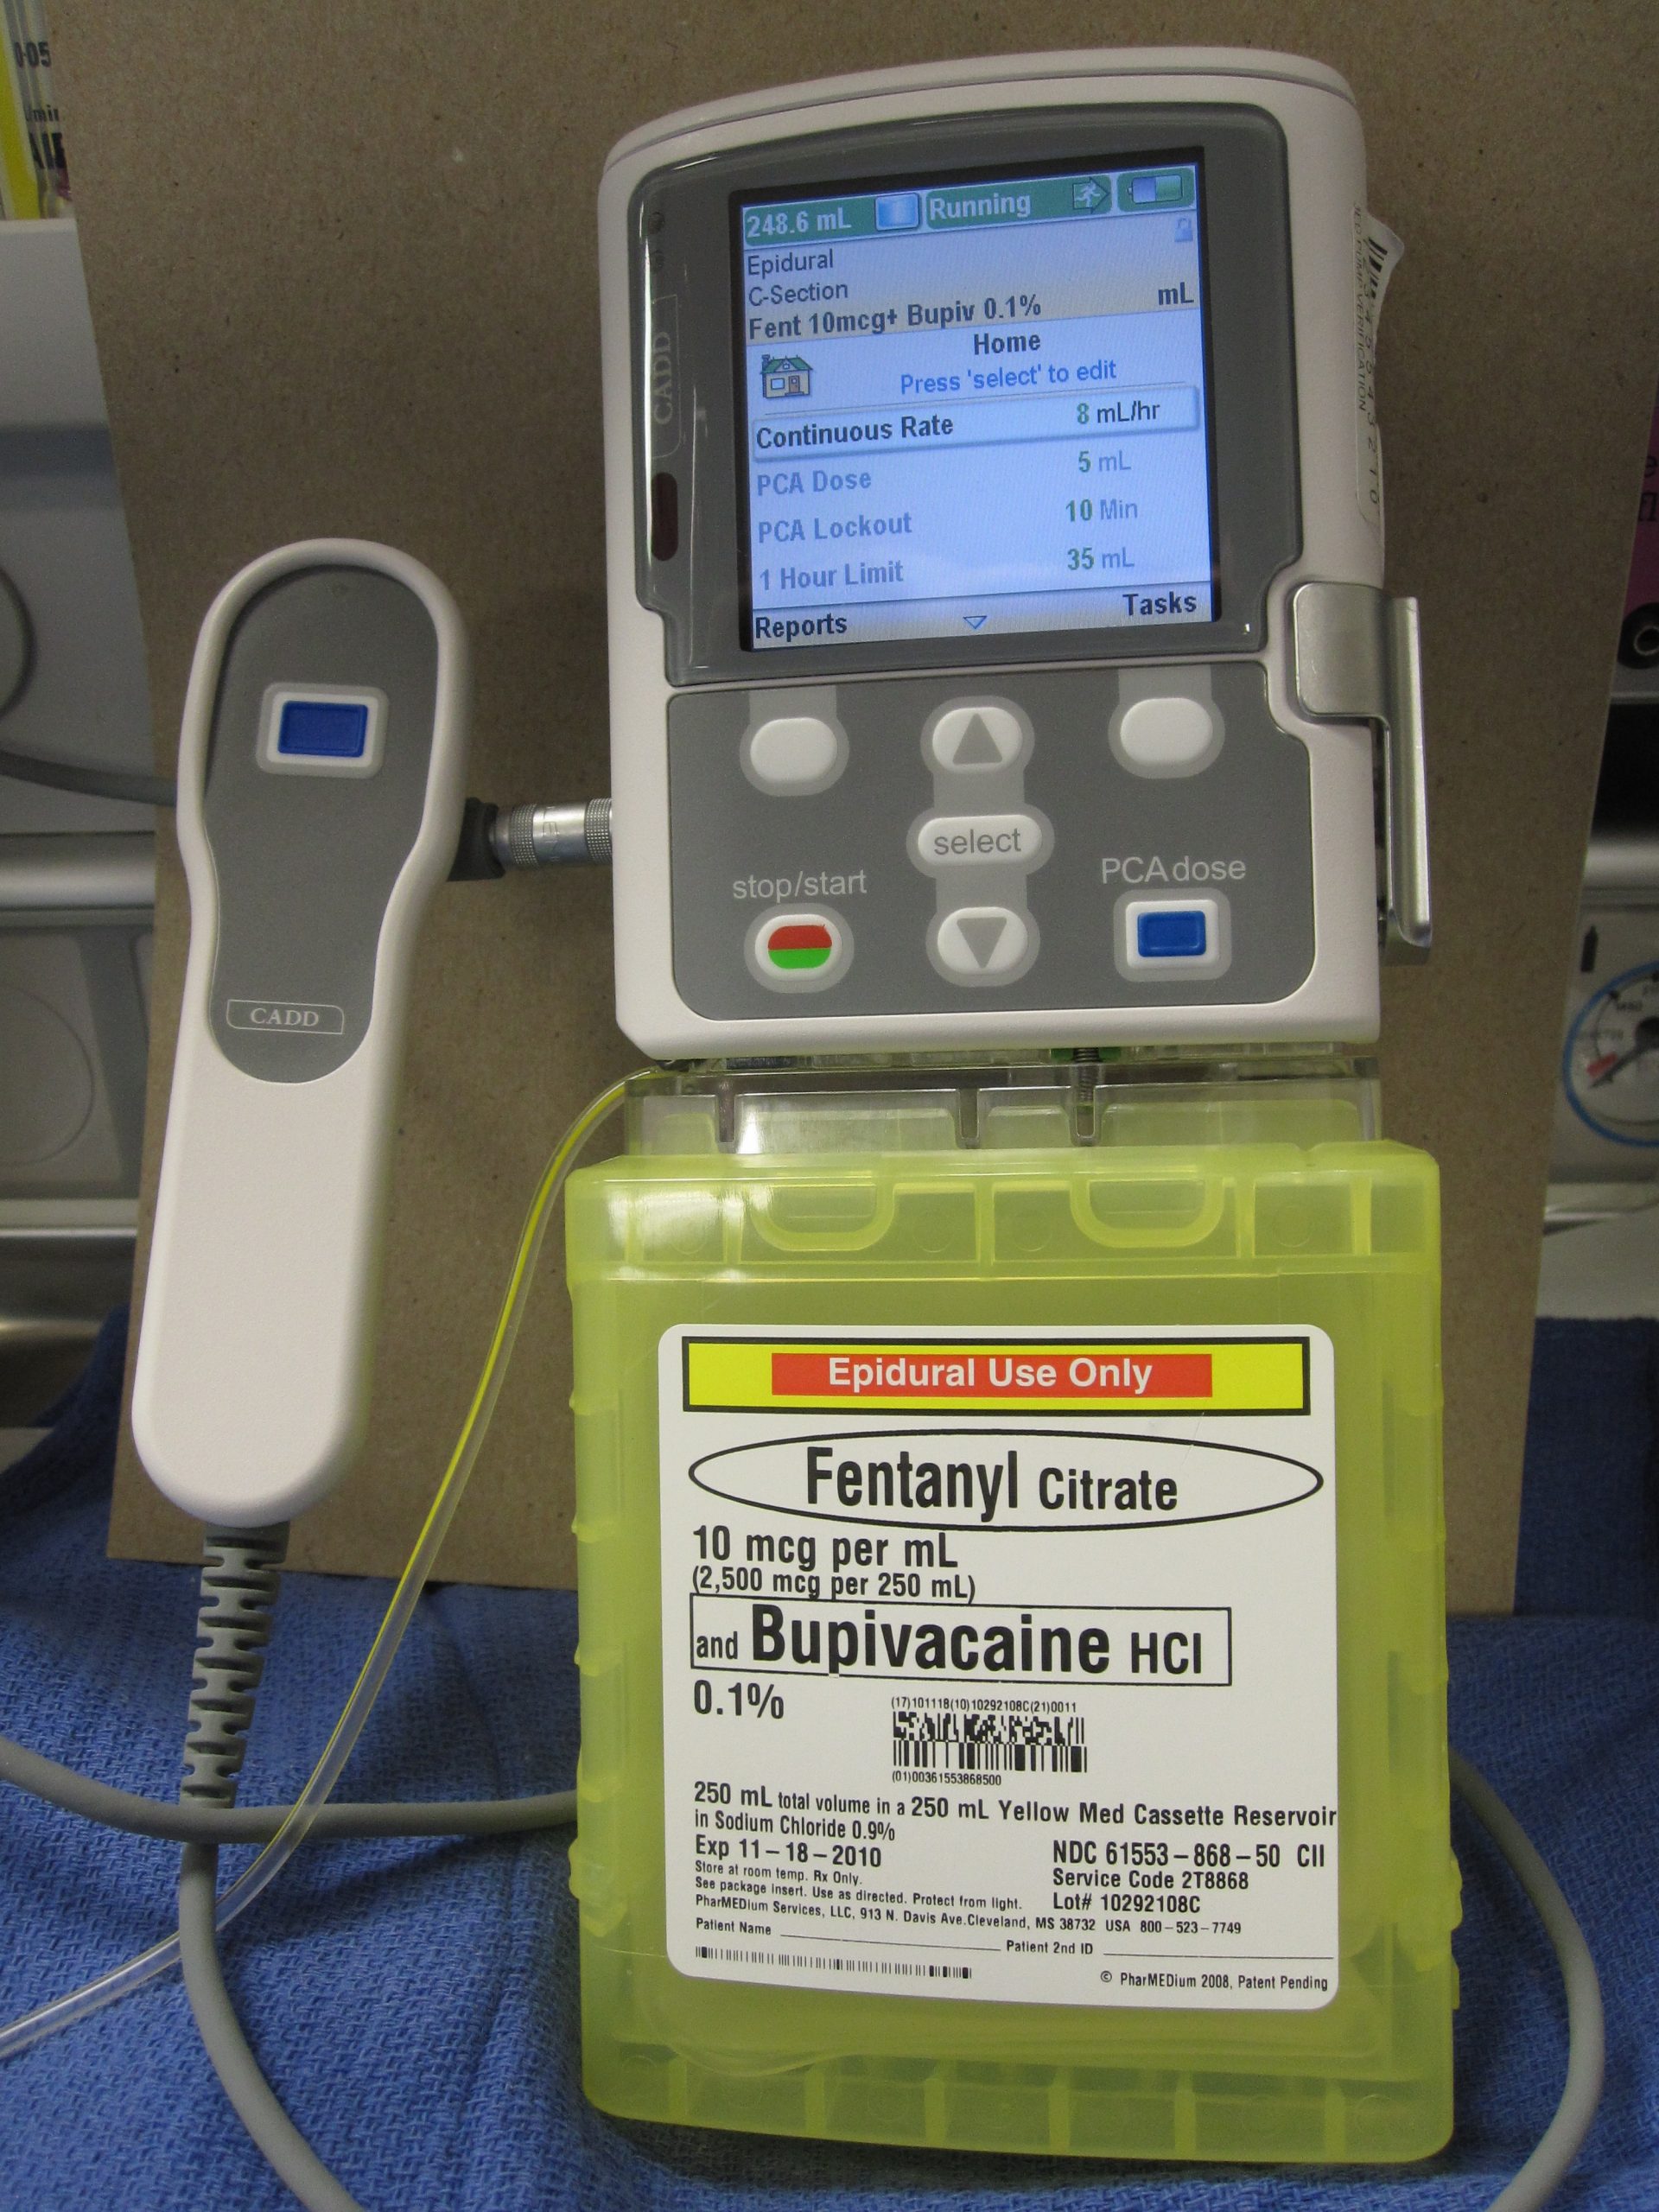 Image showing Patient Controlled Analgesia (PCA) Pump